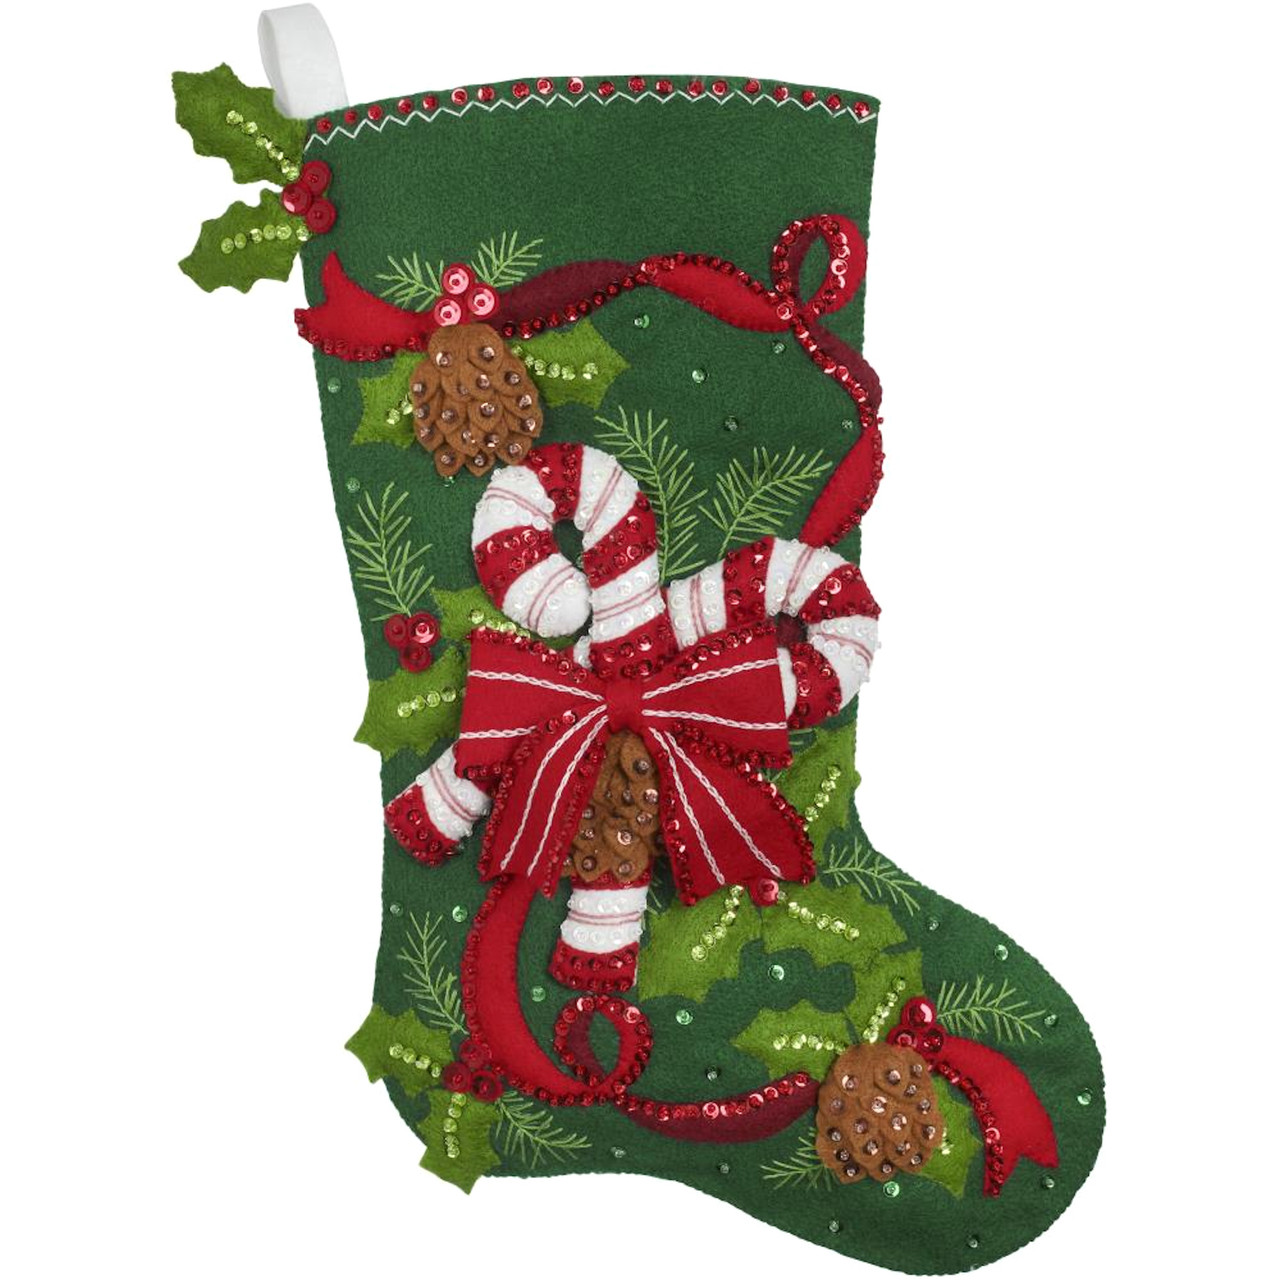 Plaid Bucilla Candy Canes And Ribbons Stocking Crossstitchworld